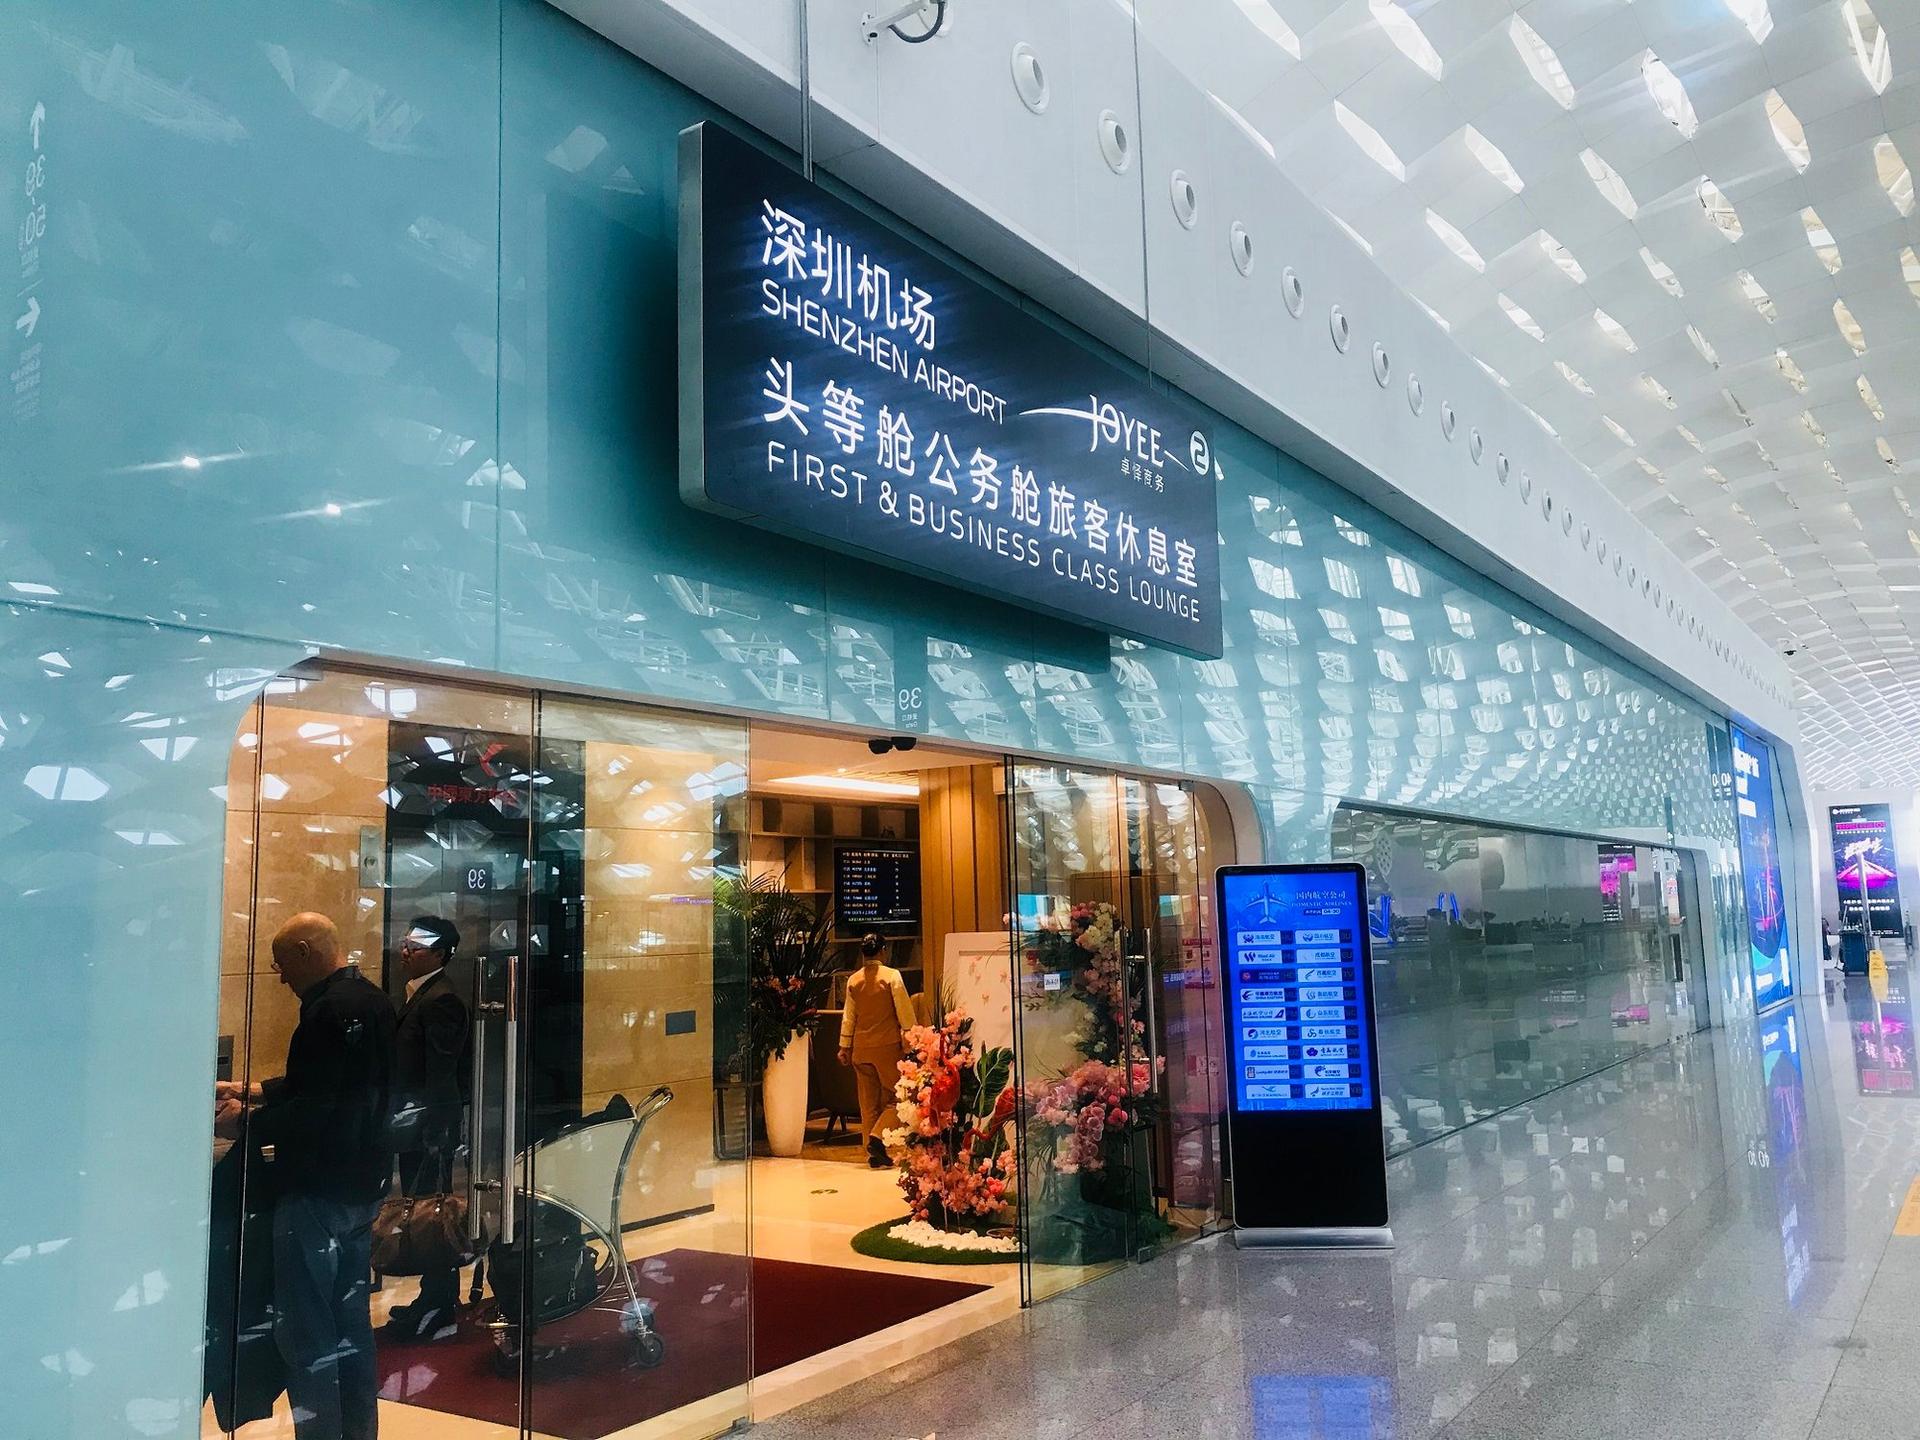 Shenzhen Airport First & Business Class Lounge (Joyee 2) image 1 of 9